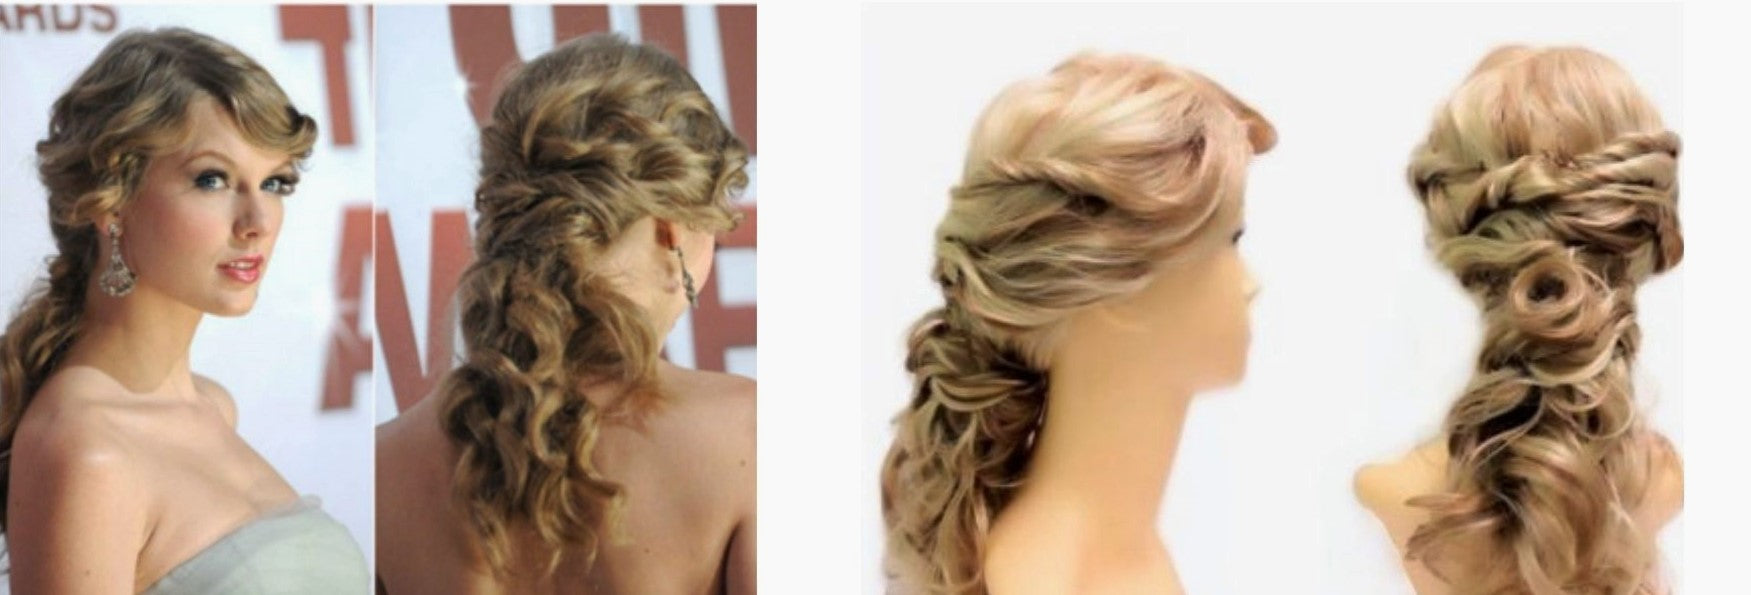 before after wig styling for taylor swift 